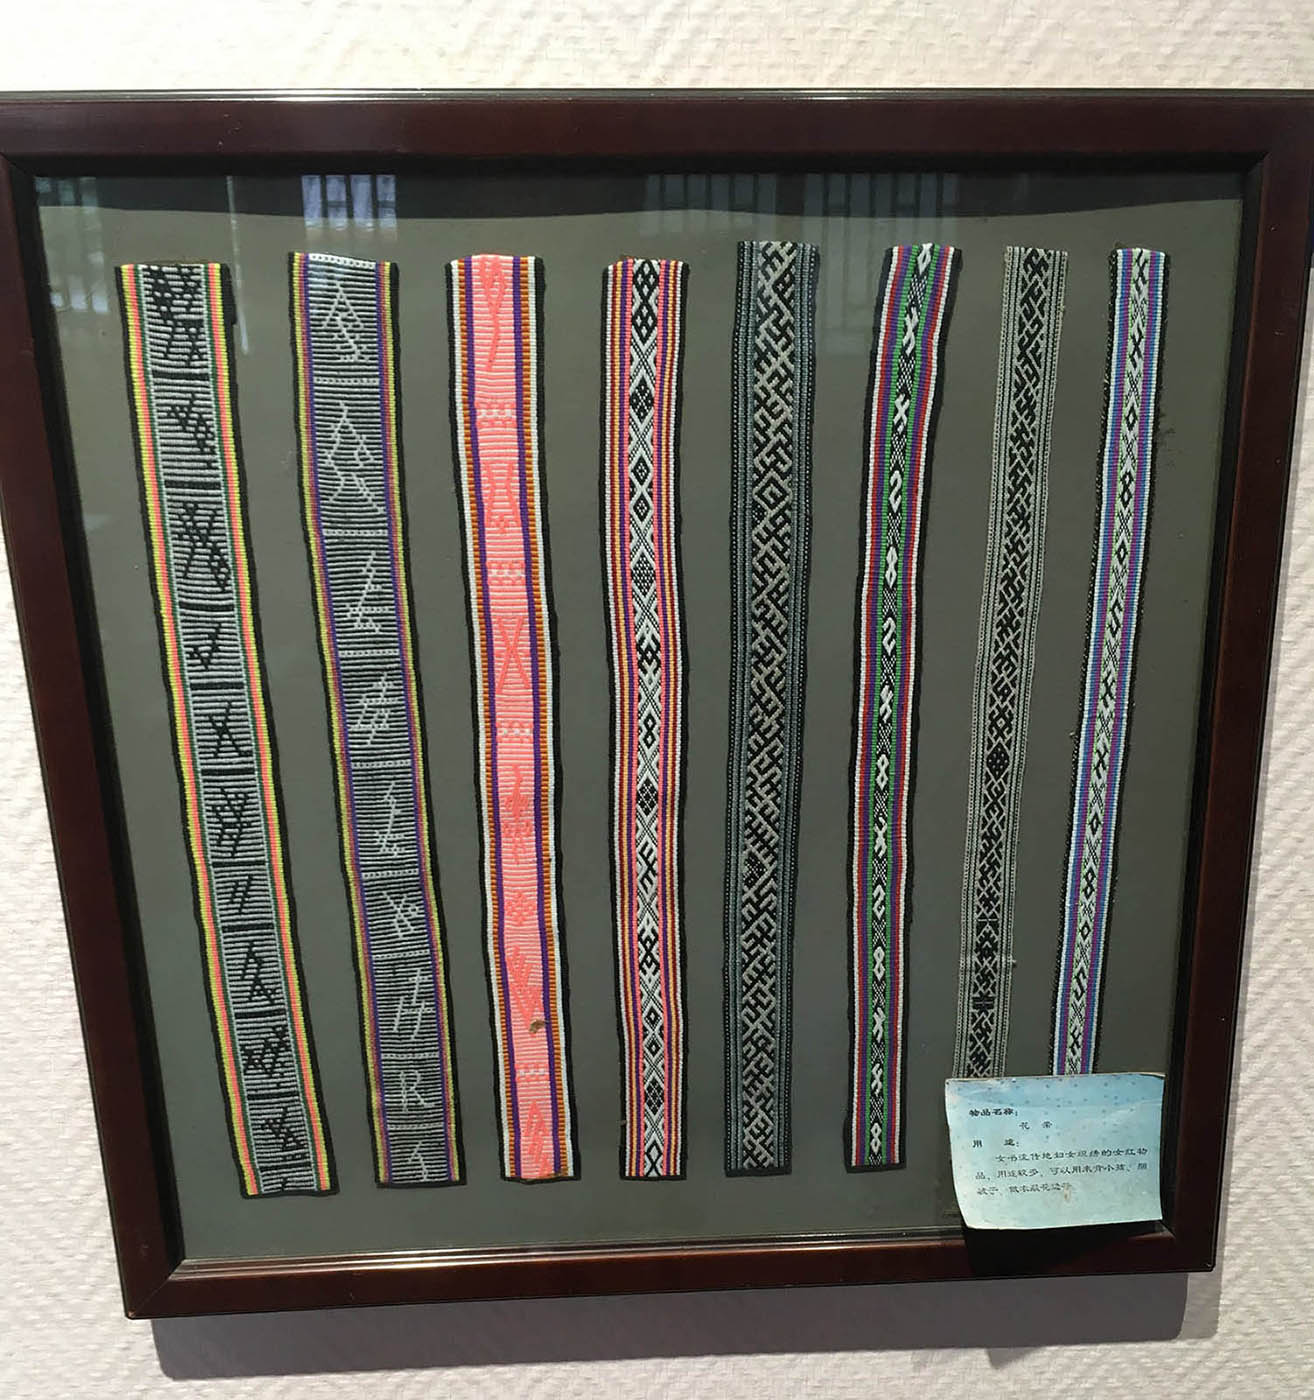 Silk belts with Nüshu characters sewn in as patterns in a frame